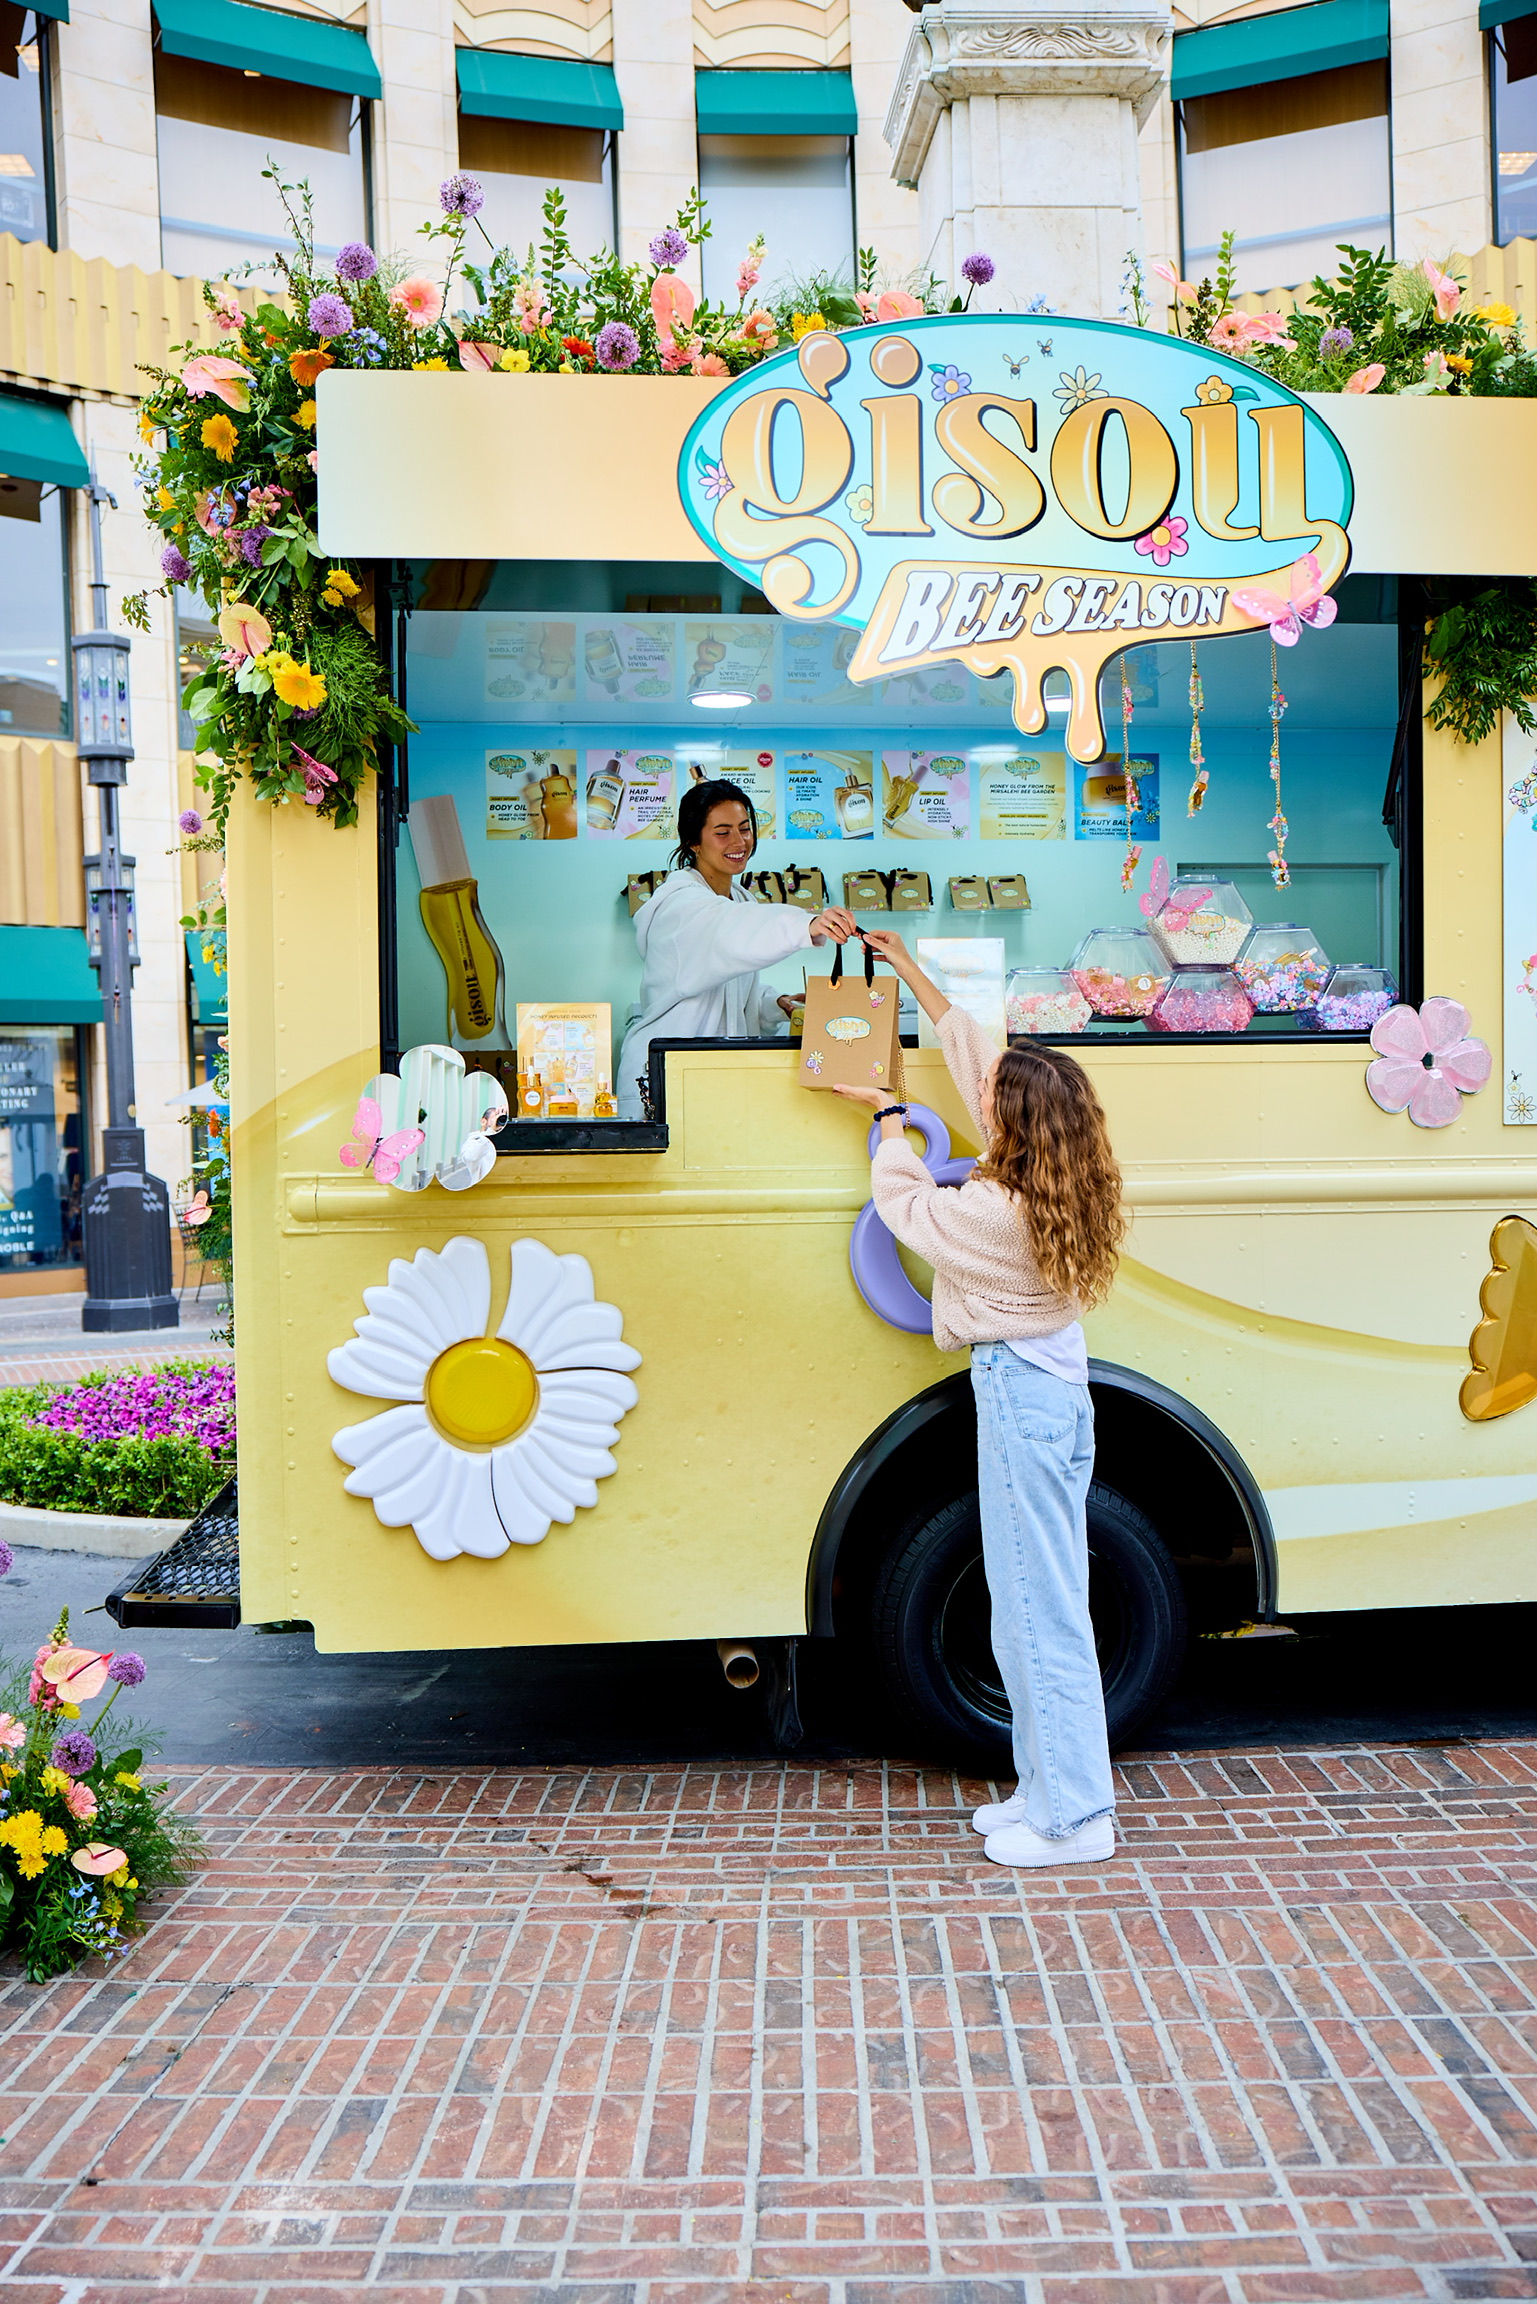 Gisou Honey Glow Truck at The Grove